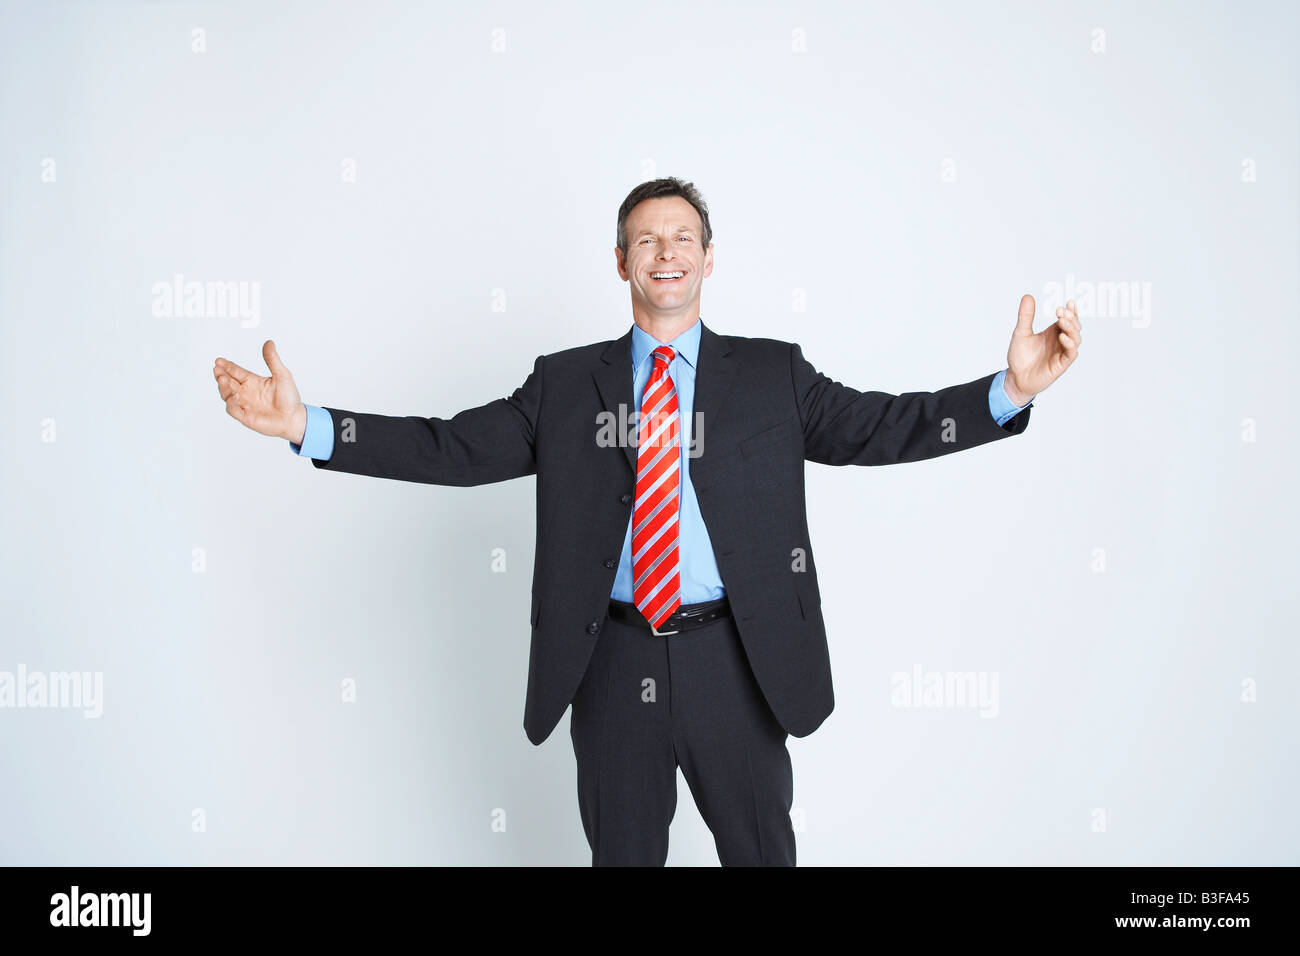 Studio portrait of businessman with arms outstretched Stock Photo